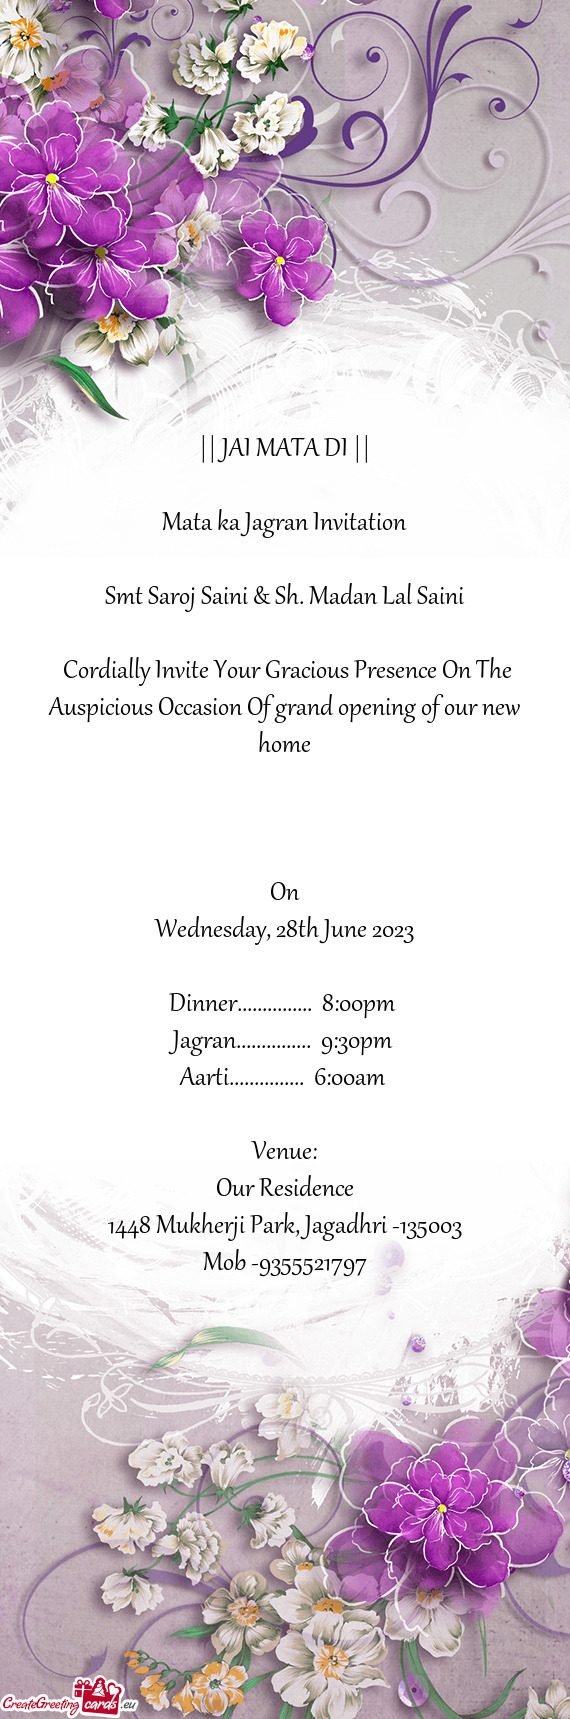 Cordially Invite Your Gracious Presence On The Auspicious Occasion Of grand opening of our new home